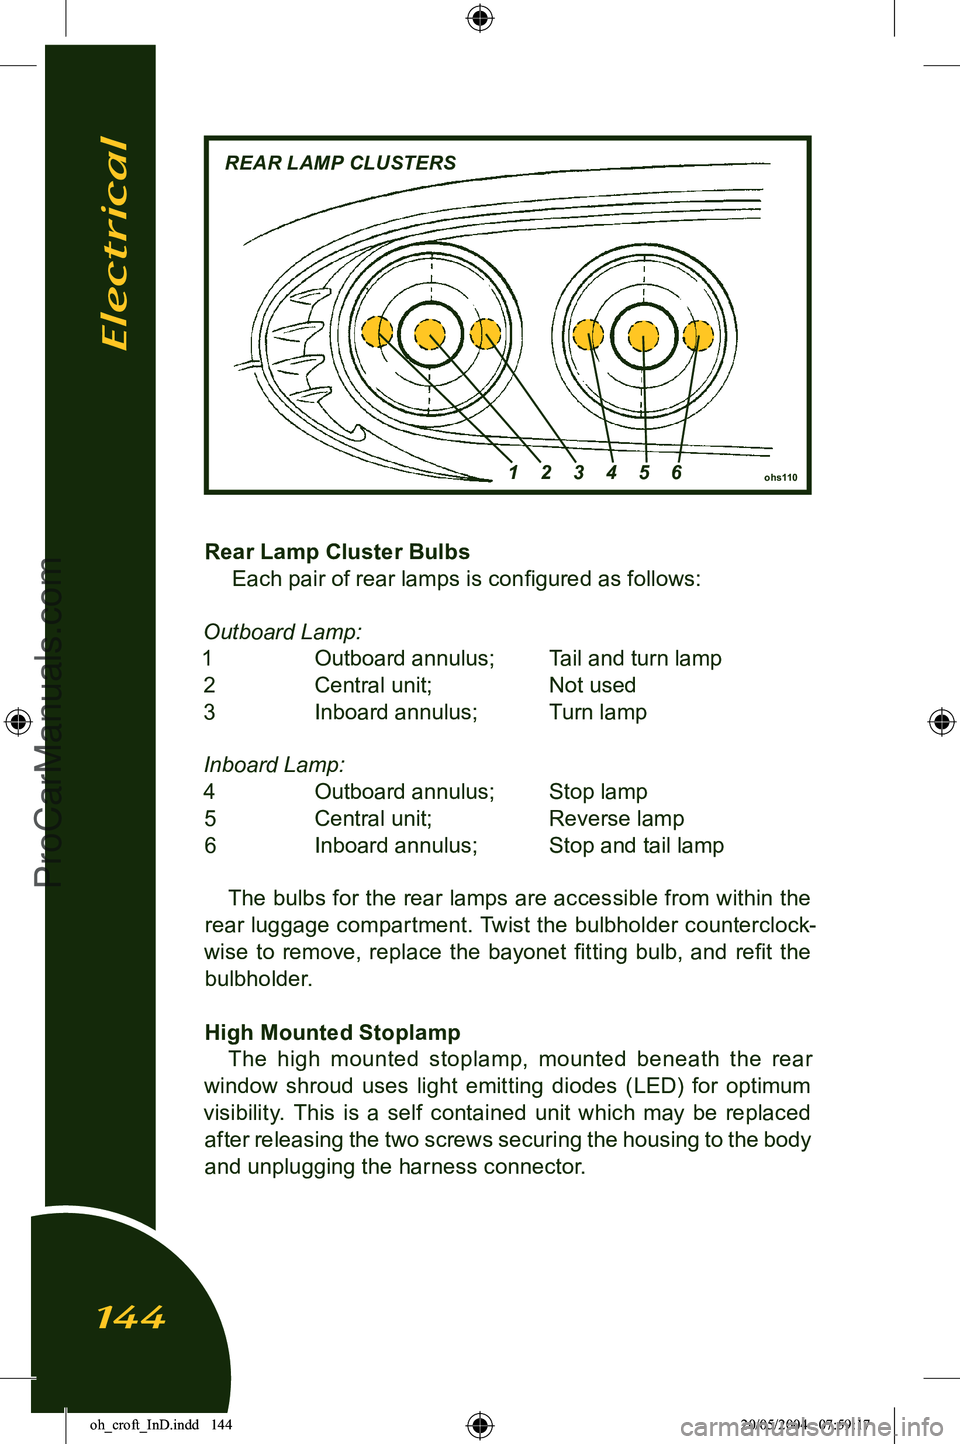 LOTUS ELISE 2005 Service Manual 
Rear Lamp Cluster BulbsEach pair of rear lamps is conﬁgured as follows:
Outboard Lamp:
1  Outboard annulus;  Tail and turn lamp 2  Central unit;  Not used
3  Inboard annulus;  Turn lamp
Inboard Lam